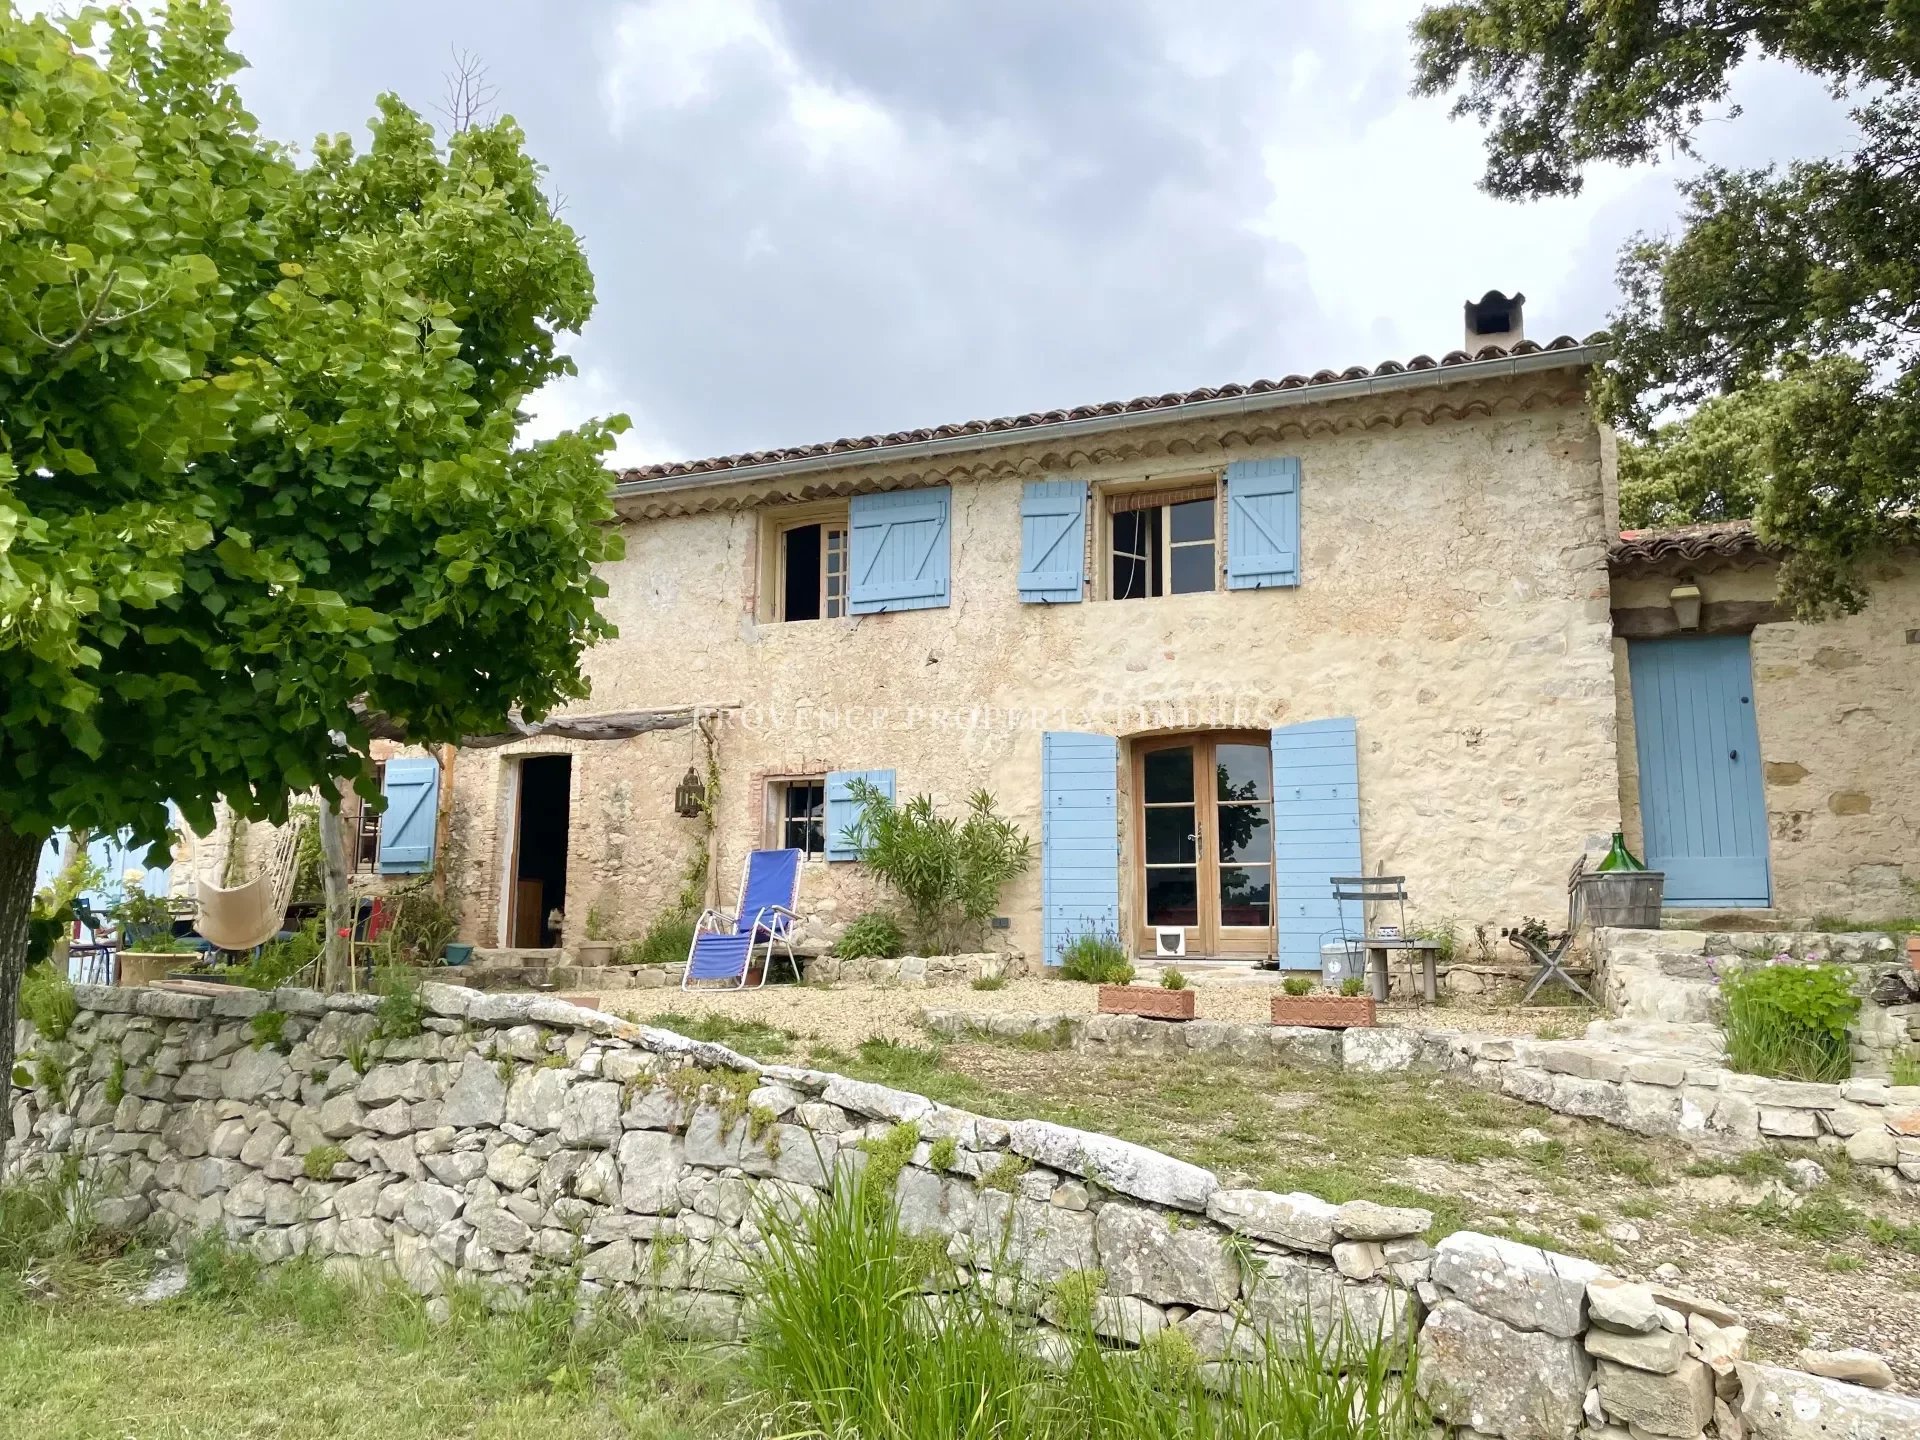 Large Property for sale with old farm house, Cotignac.